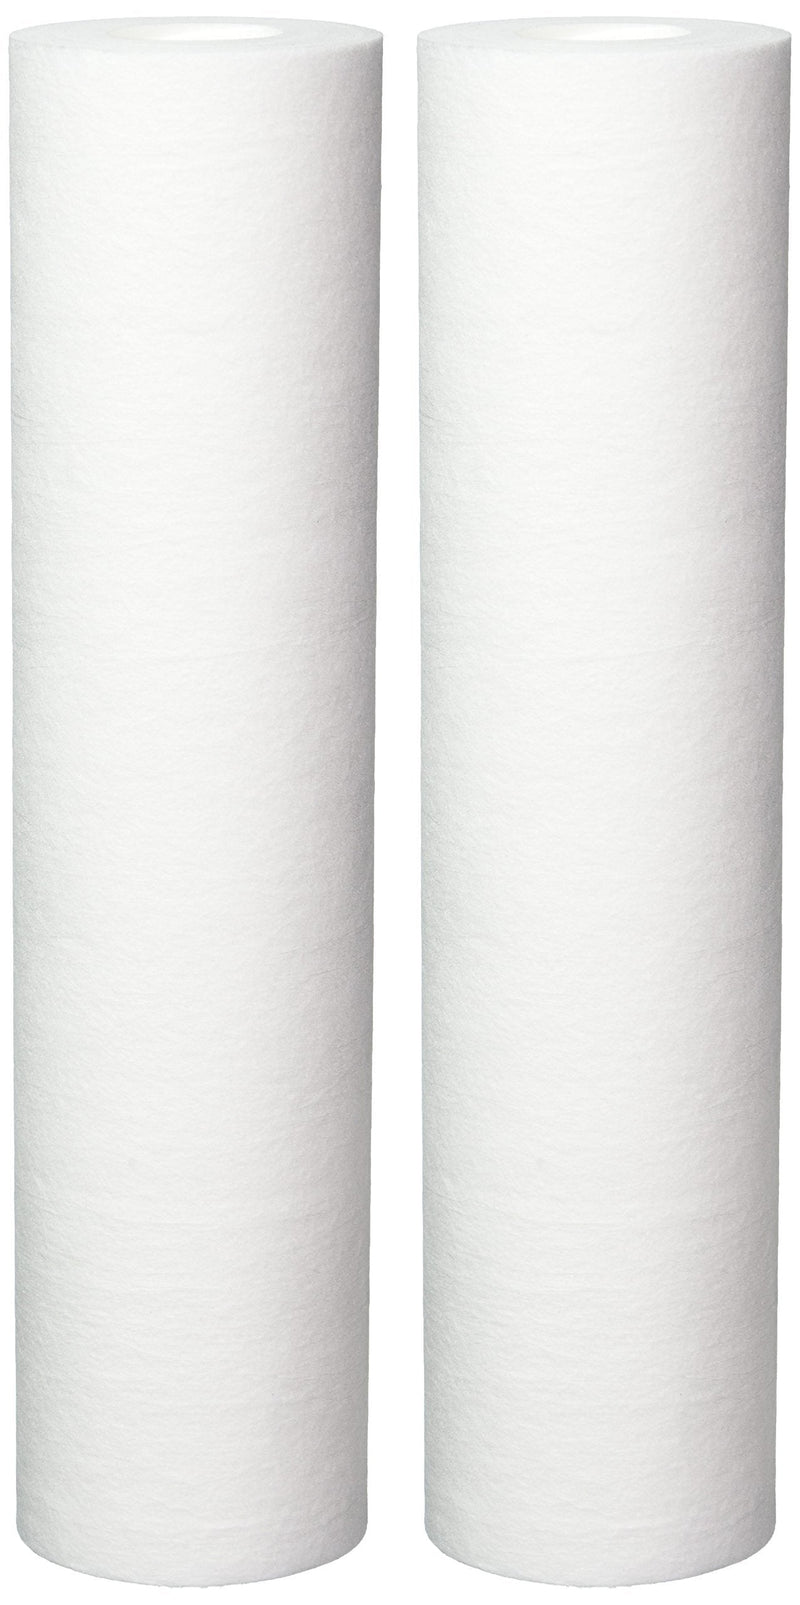 Culligan P5A P5 Whole House Premium Water Filter, 8,000 Gallons, 2 Pack, White, 2 Count - NewNest Australia